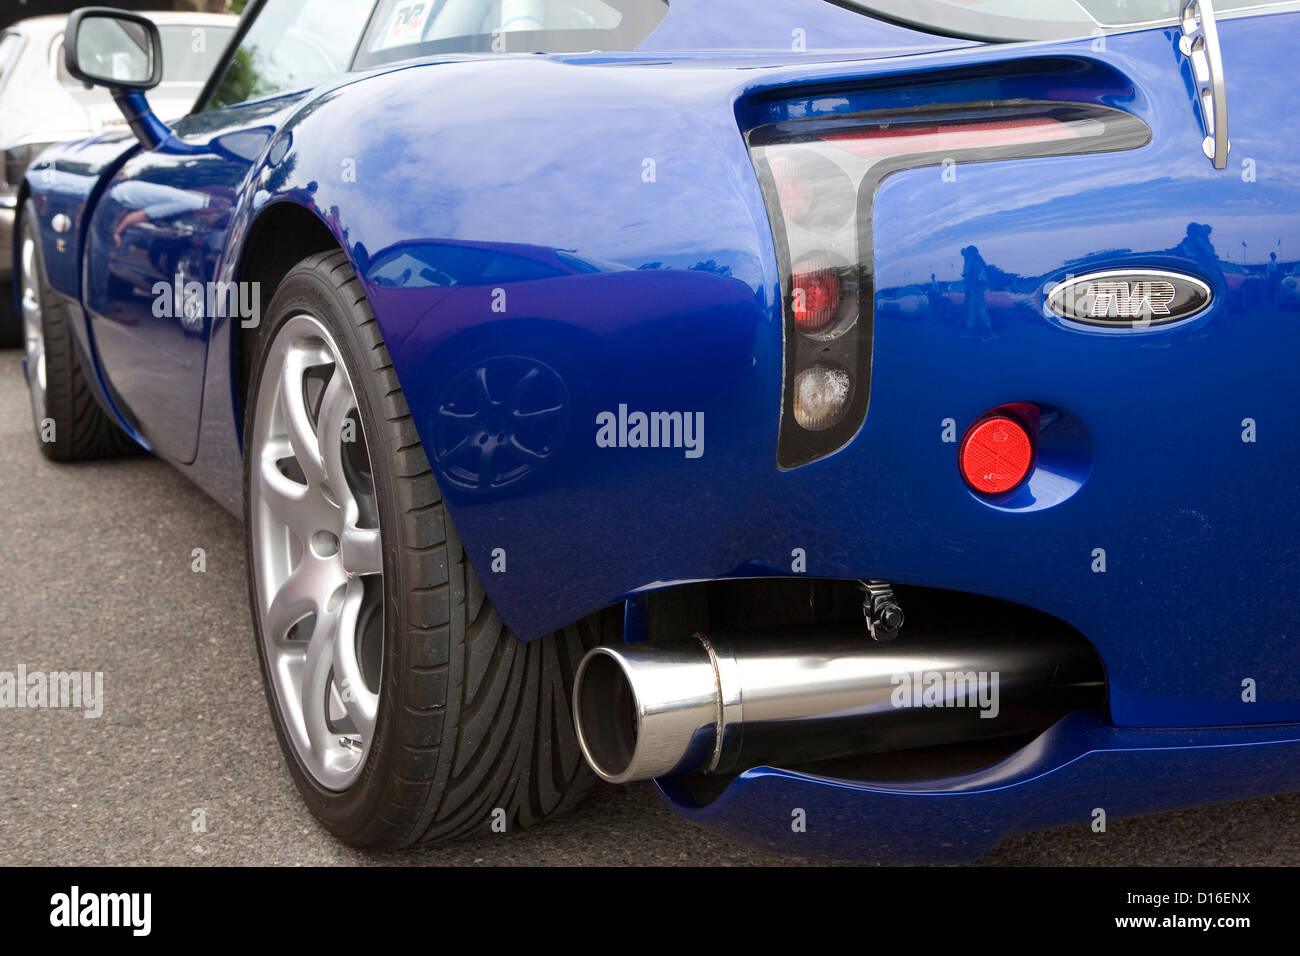 A sideways exhaust on the back of a TVR supercar. Stock Photo